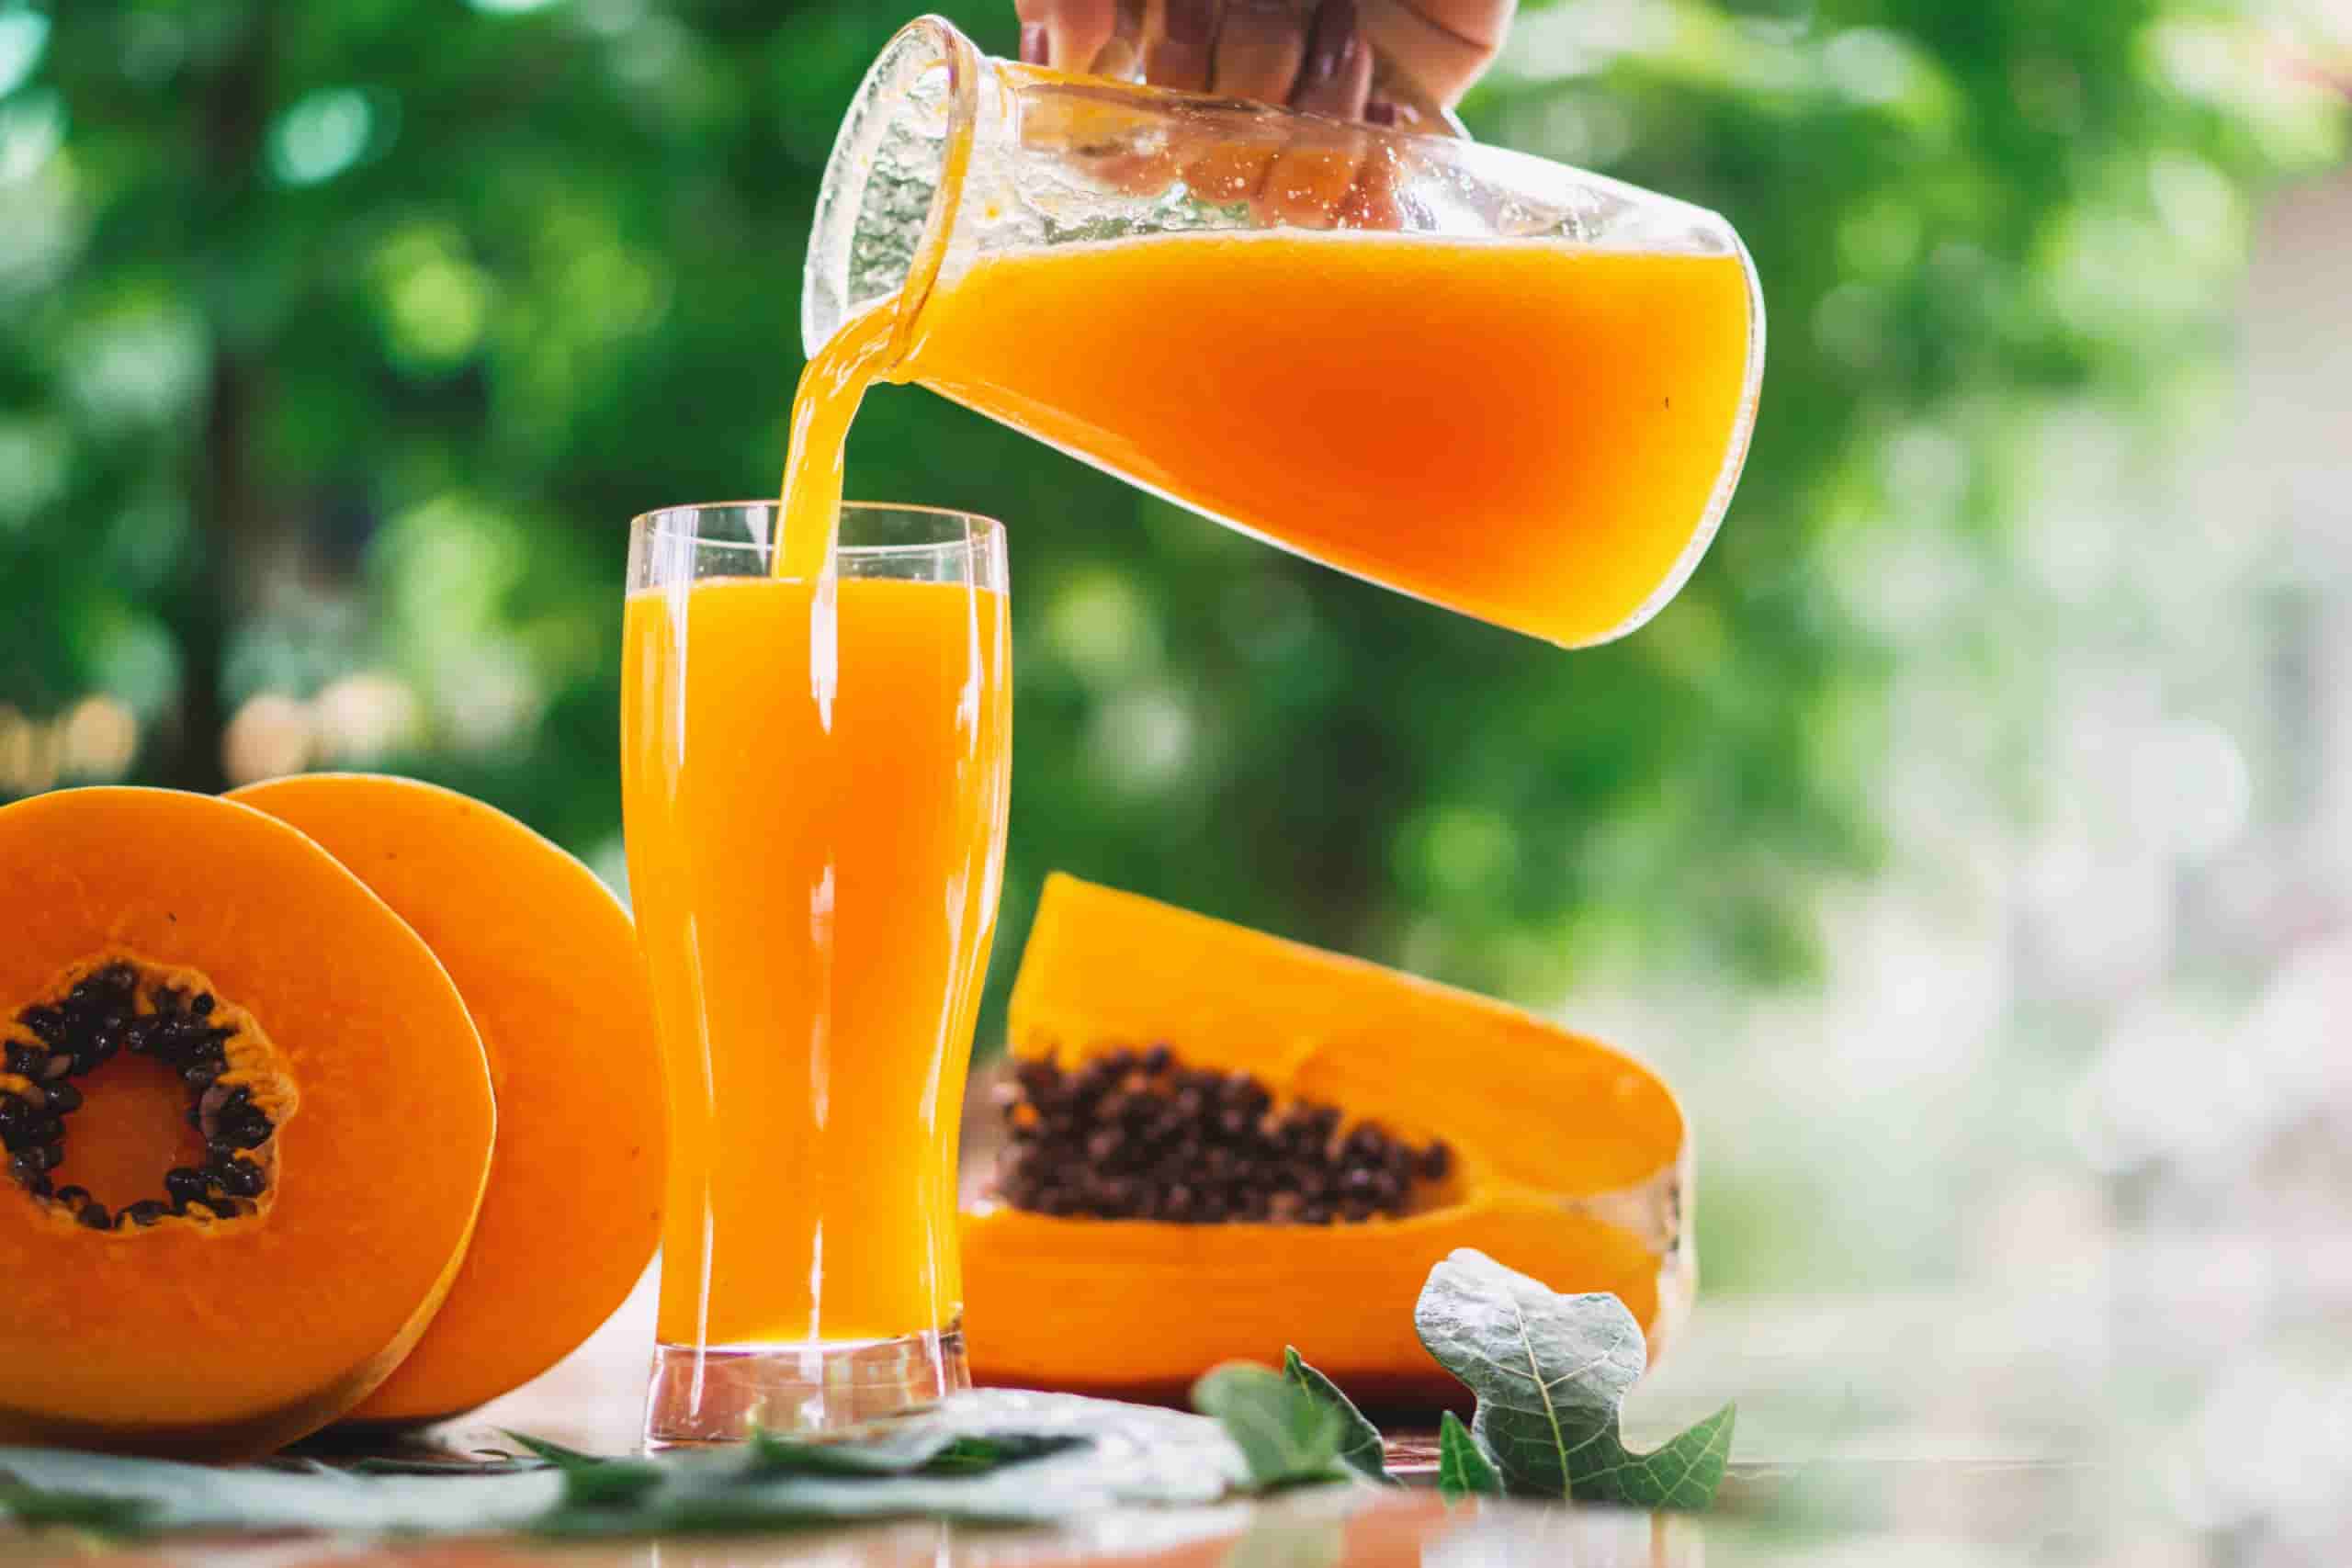 Papaya Juice Concentrate Growth in India